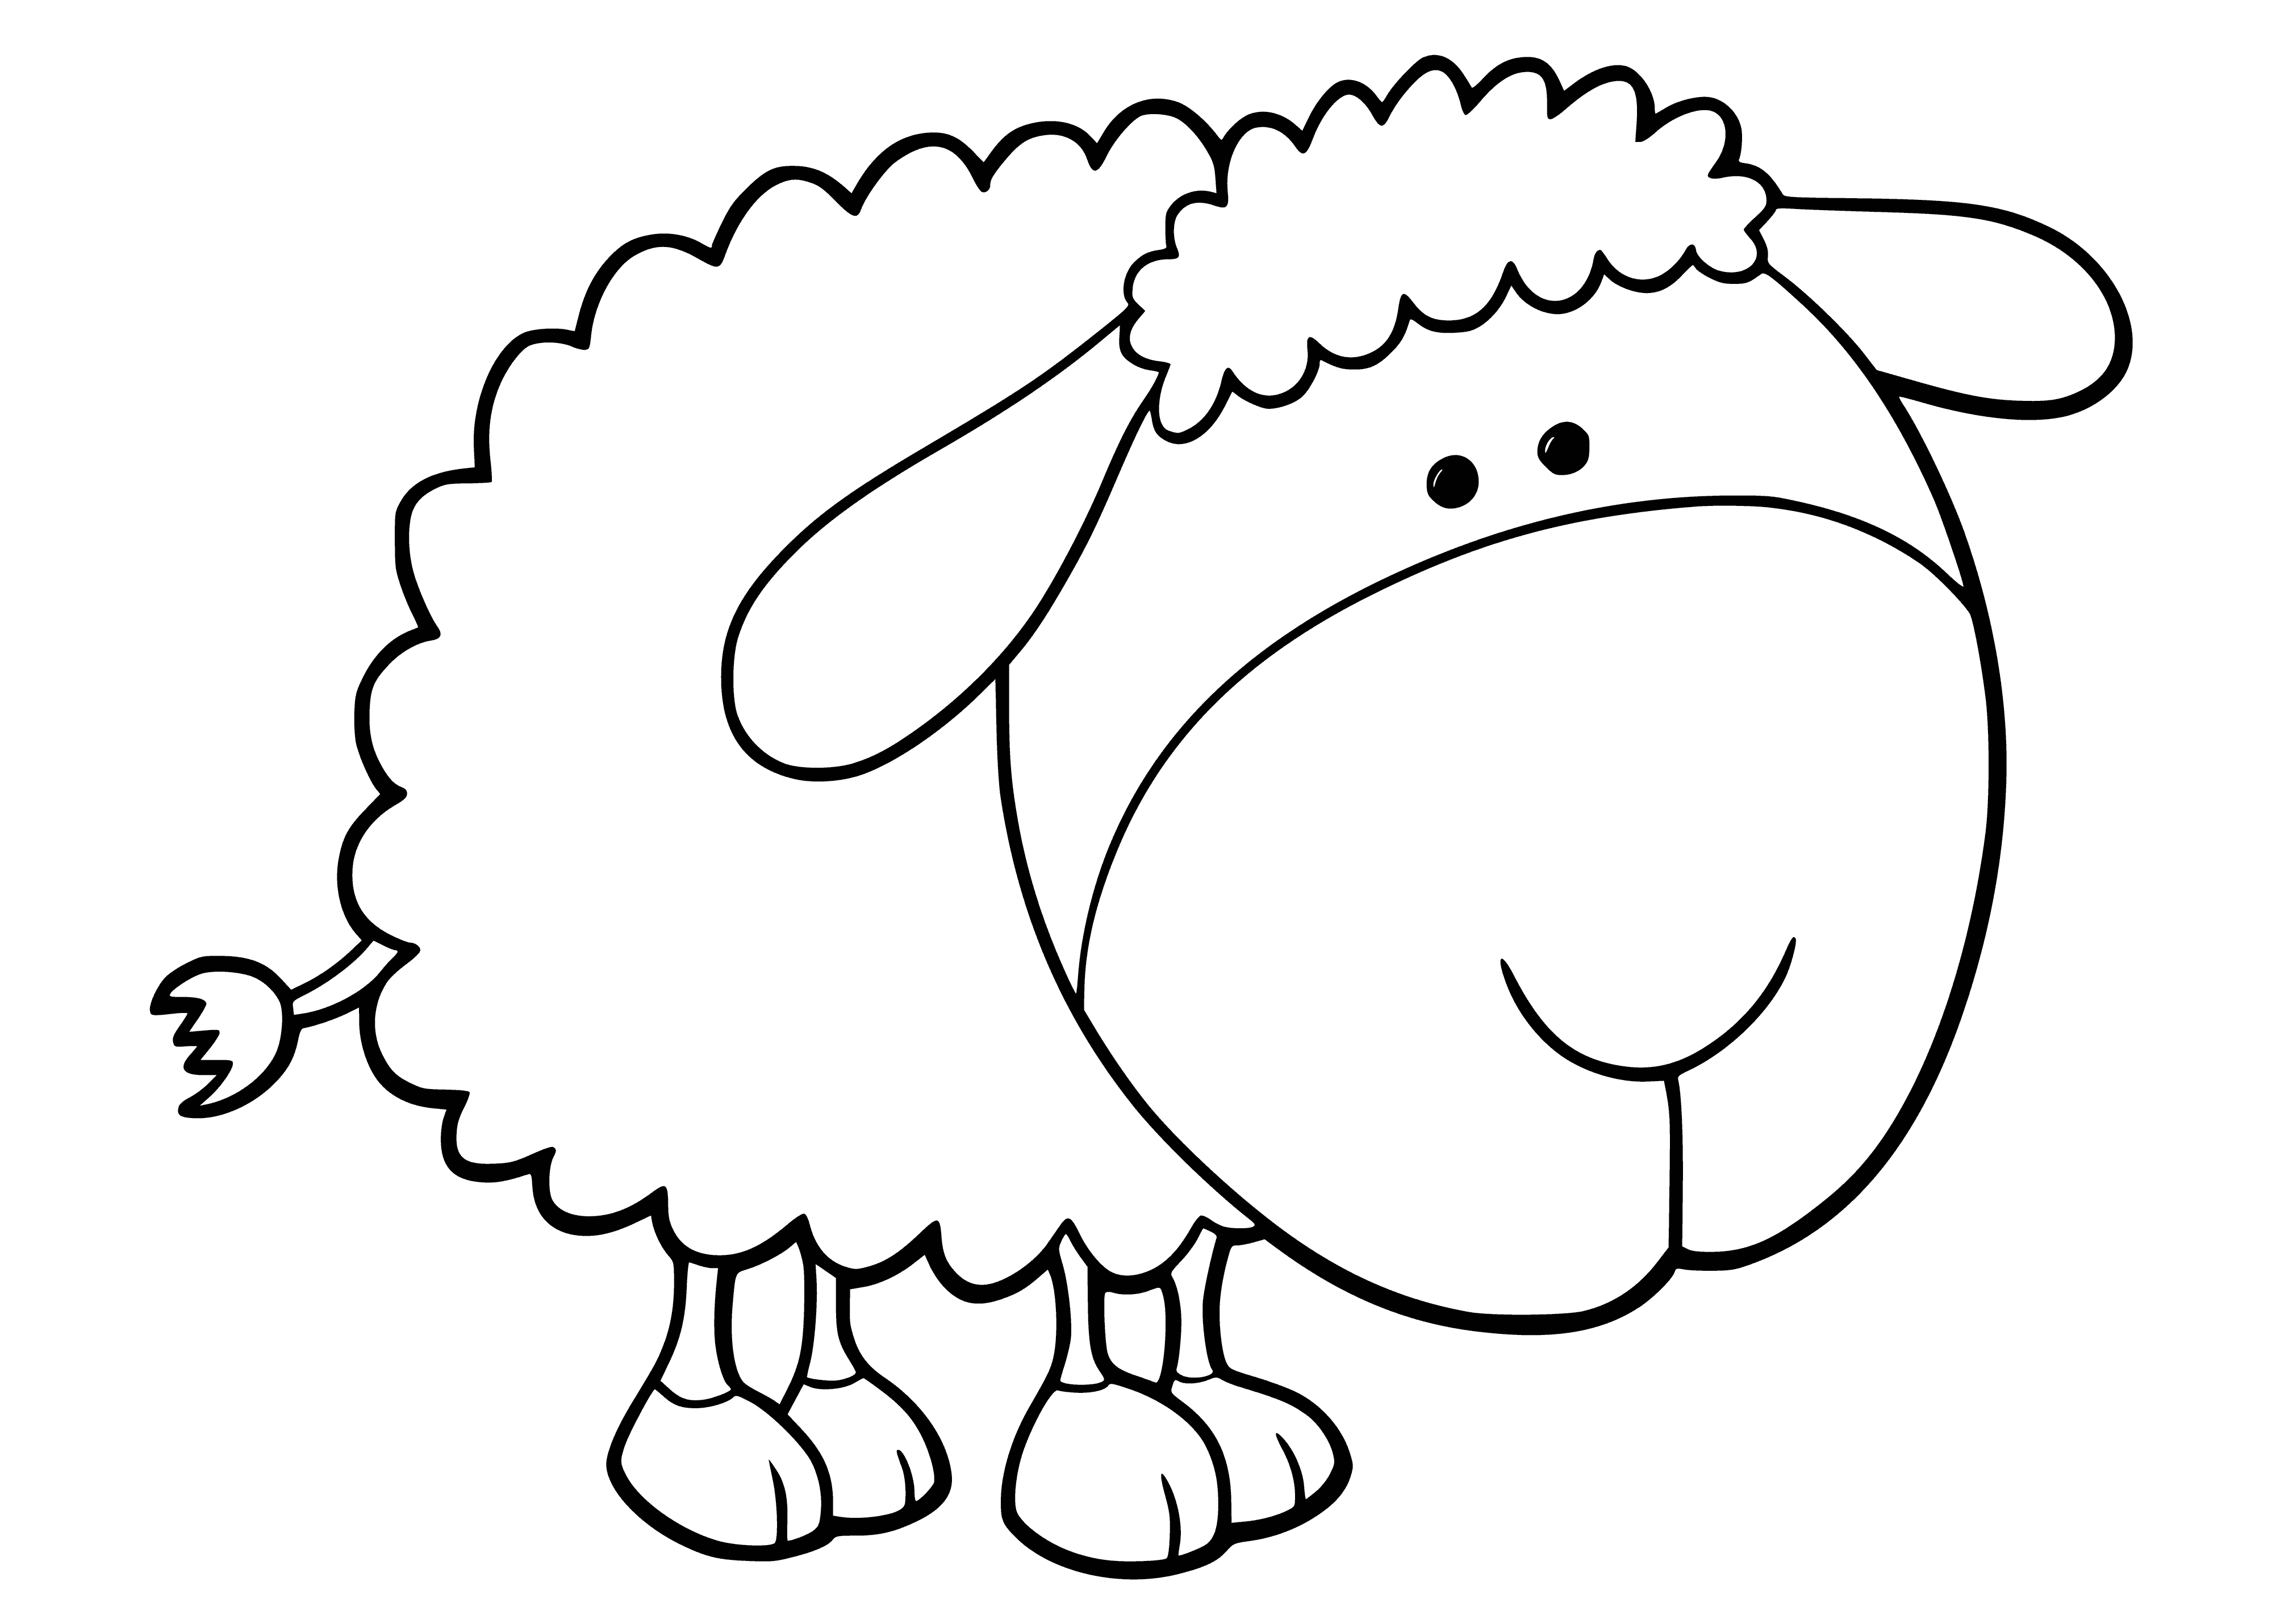 Toy sheep coloring page